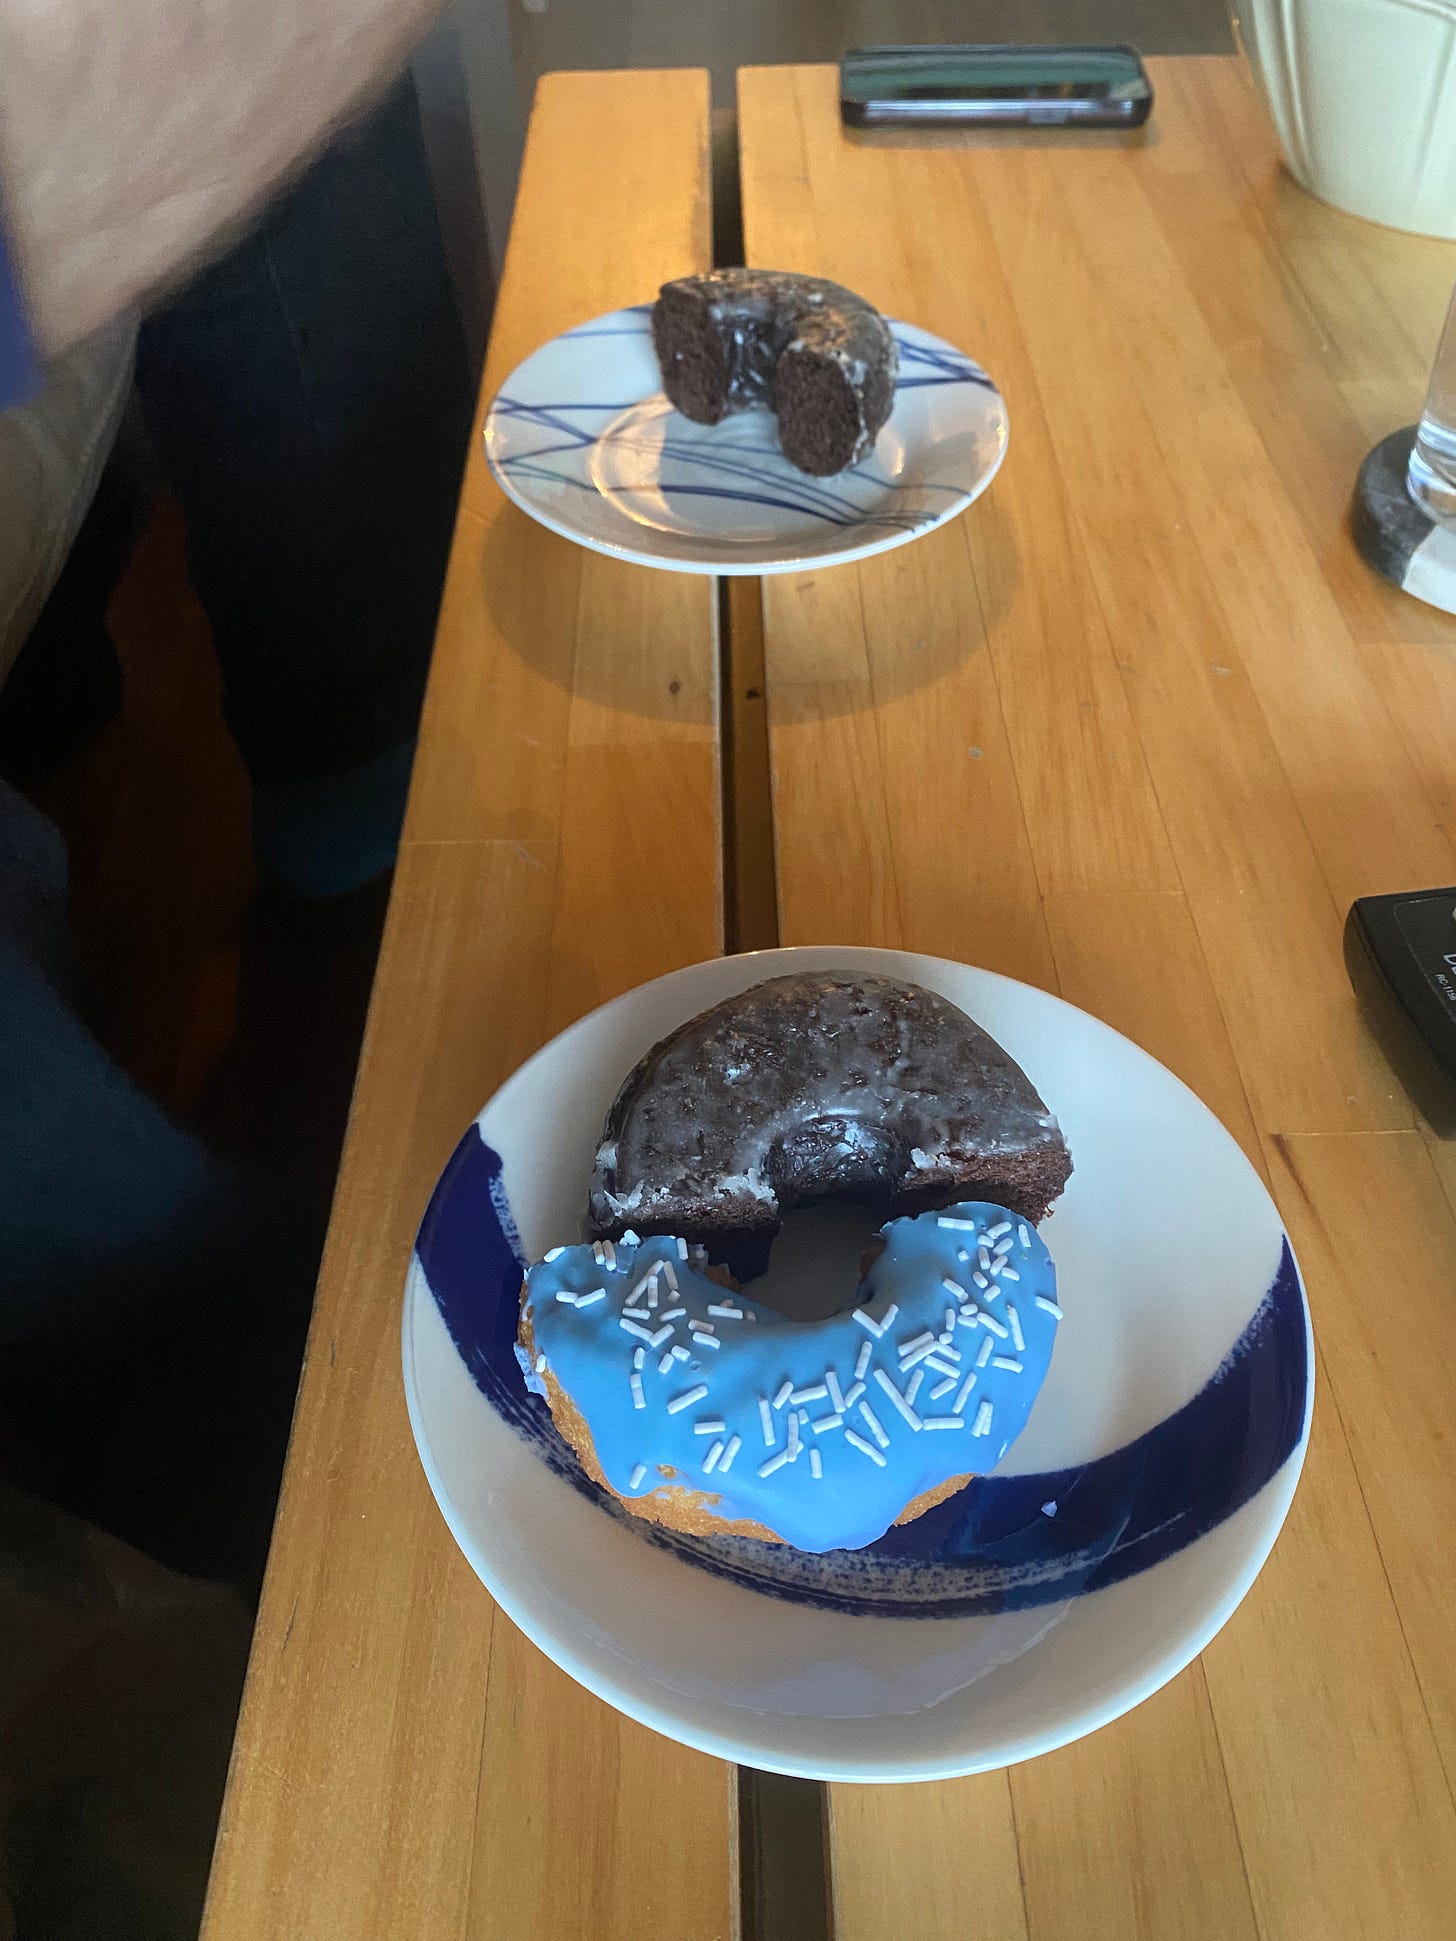 two small plates with donut halves on them. The nearer of the two has a half of a chocolate glaze next to something with blue frosting and white sprinkles, and the one in the background has only the chocolate.